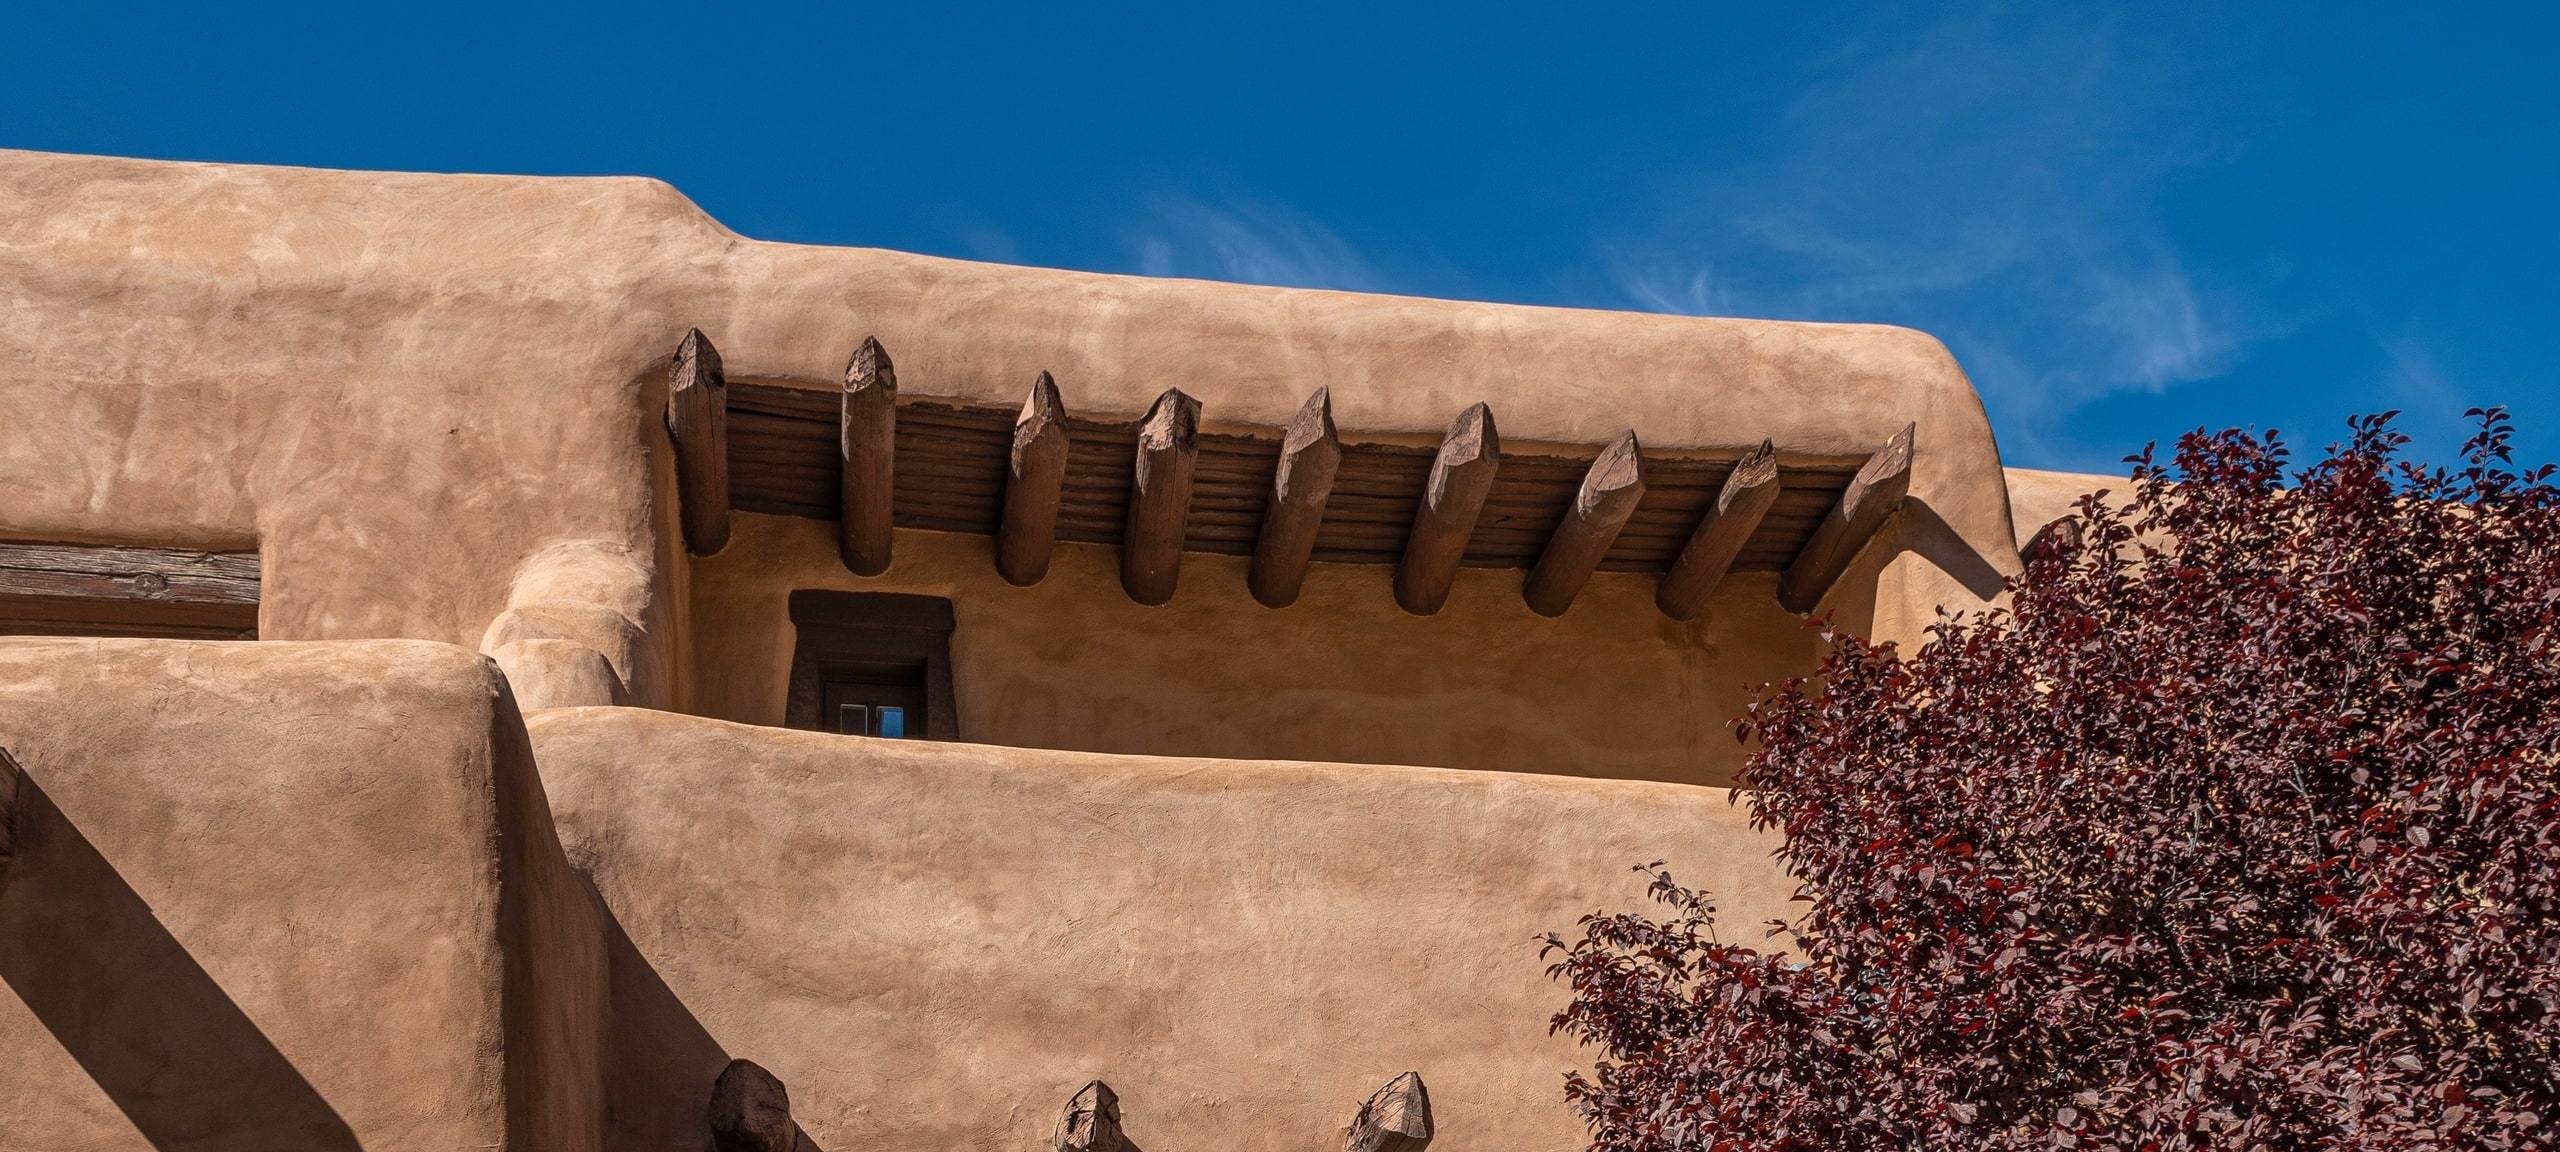 Adobe home and blue sky in Santa Fe, New Mexico